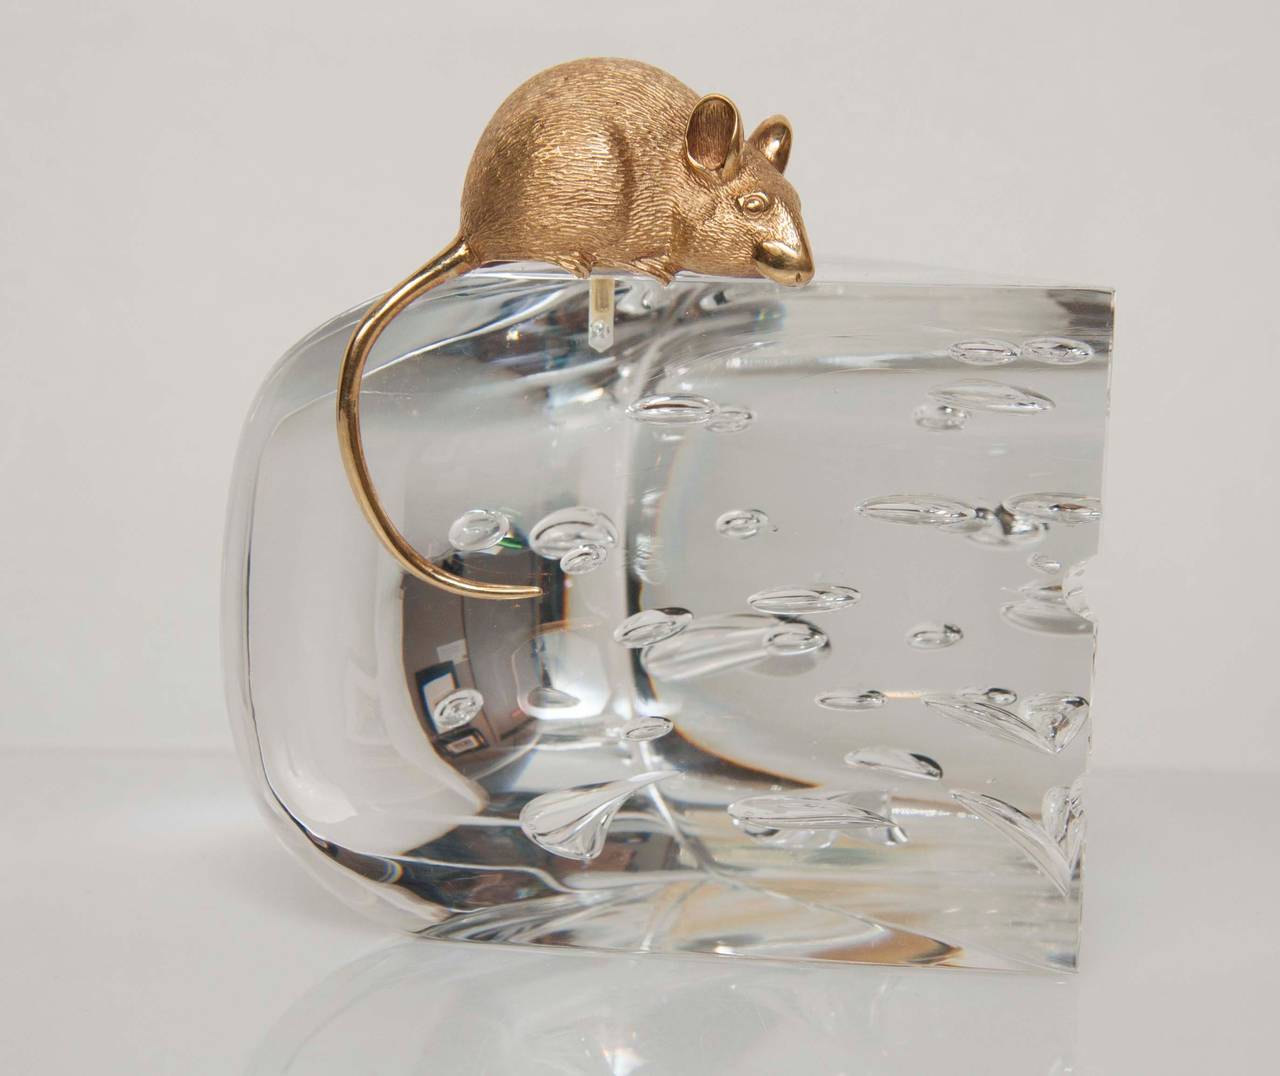 A whimsical Steuben cheese form glass Objet D'art surmounted with an 18-karat (tested) gold mouse.